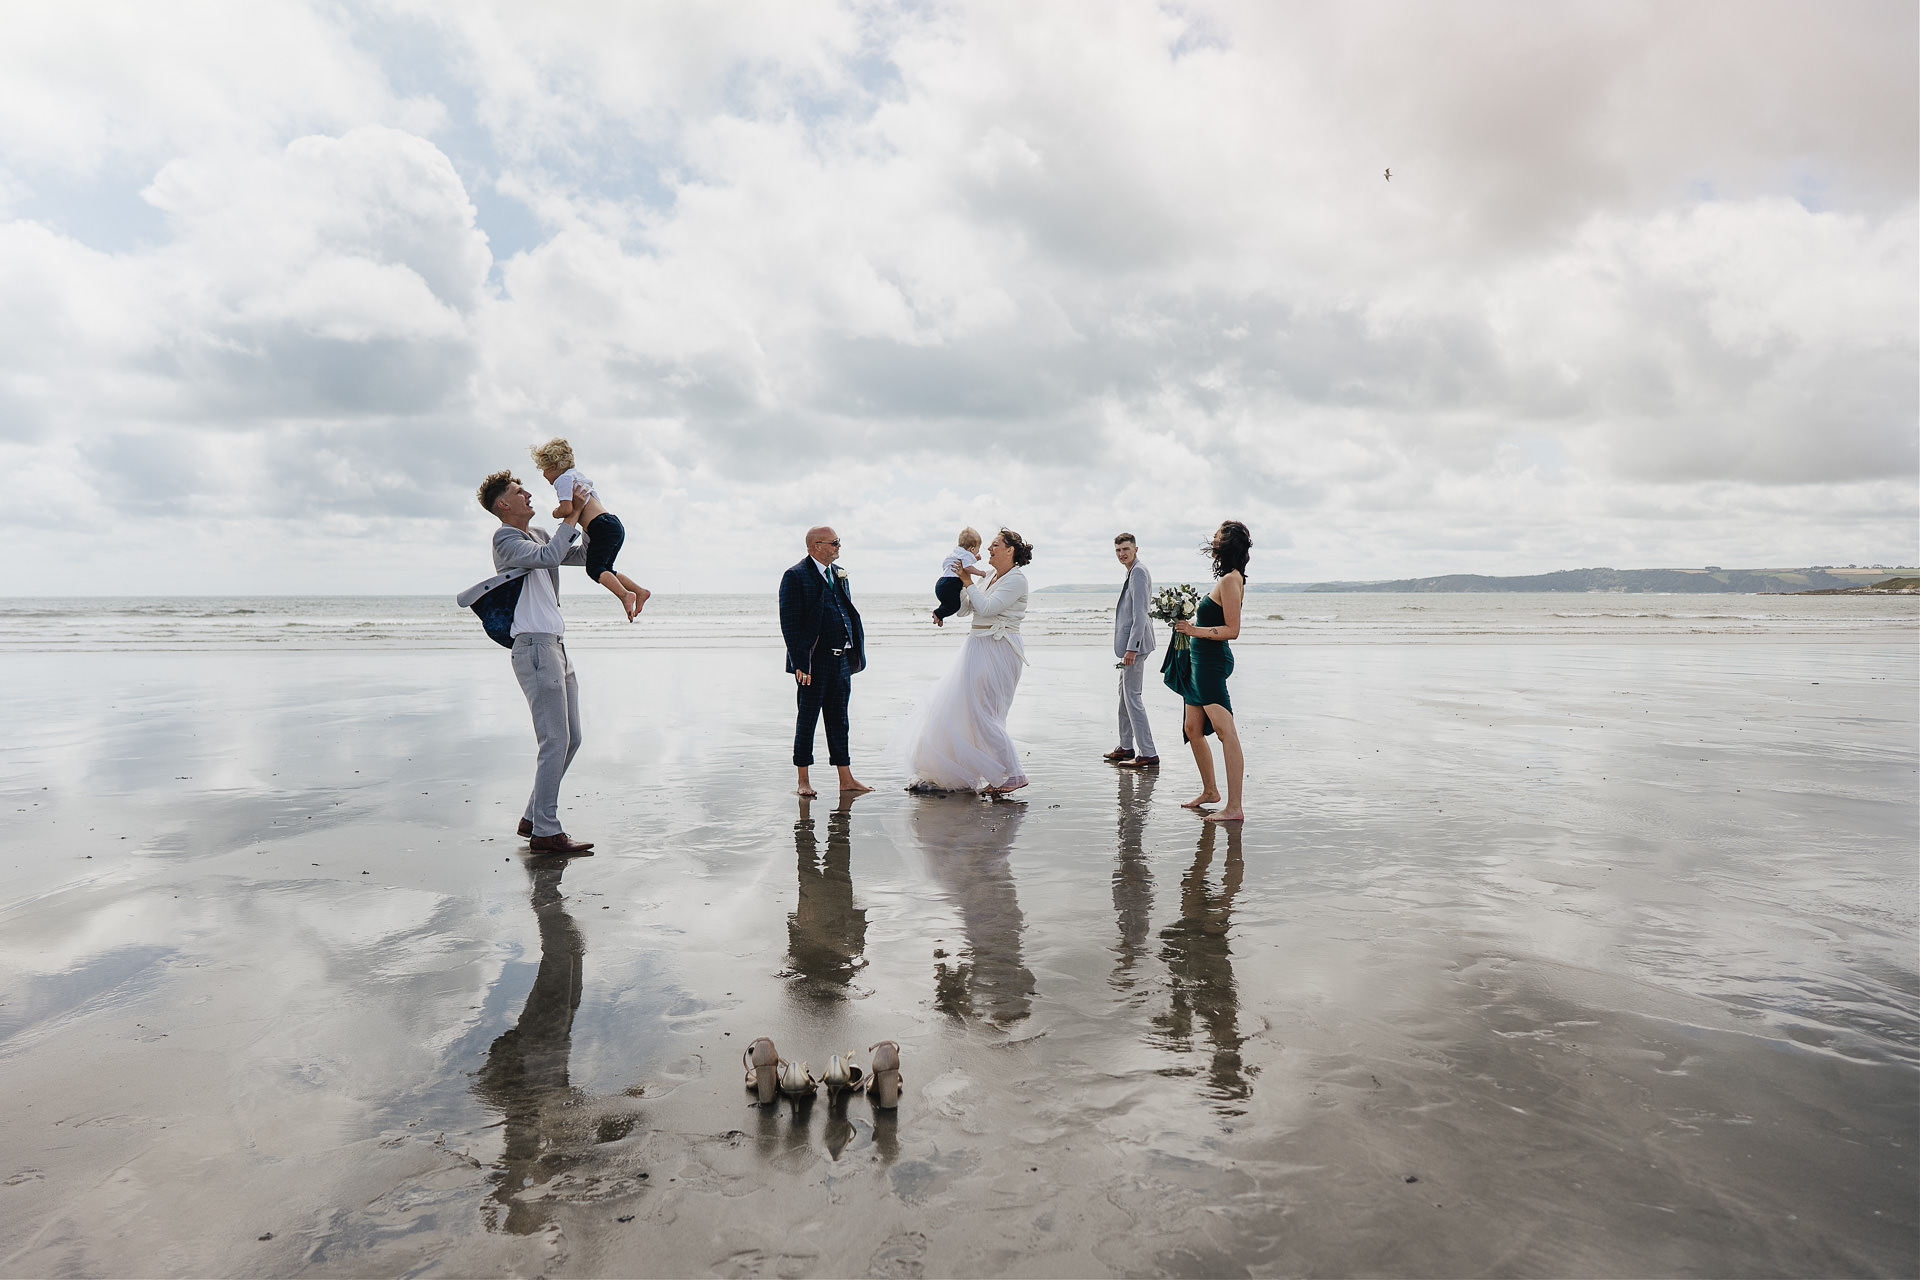 A family wedding celebration on the beach in Cornwall